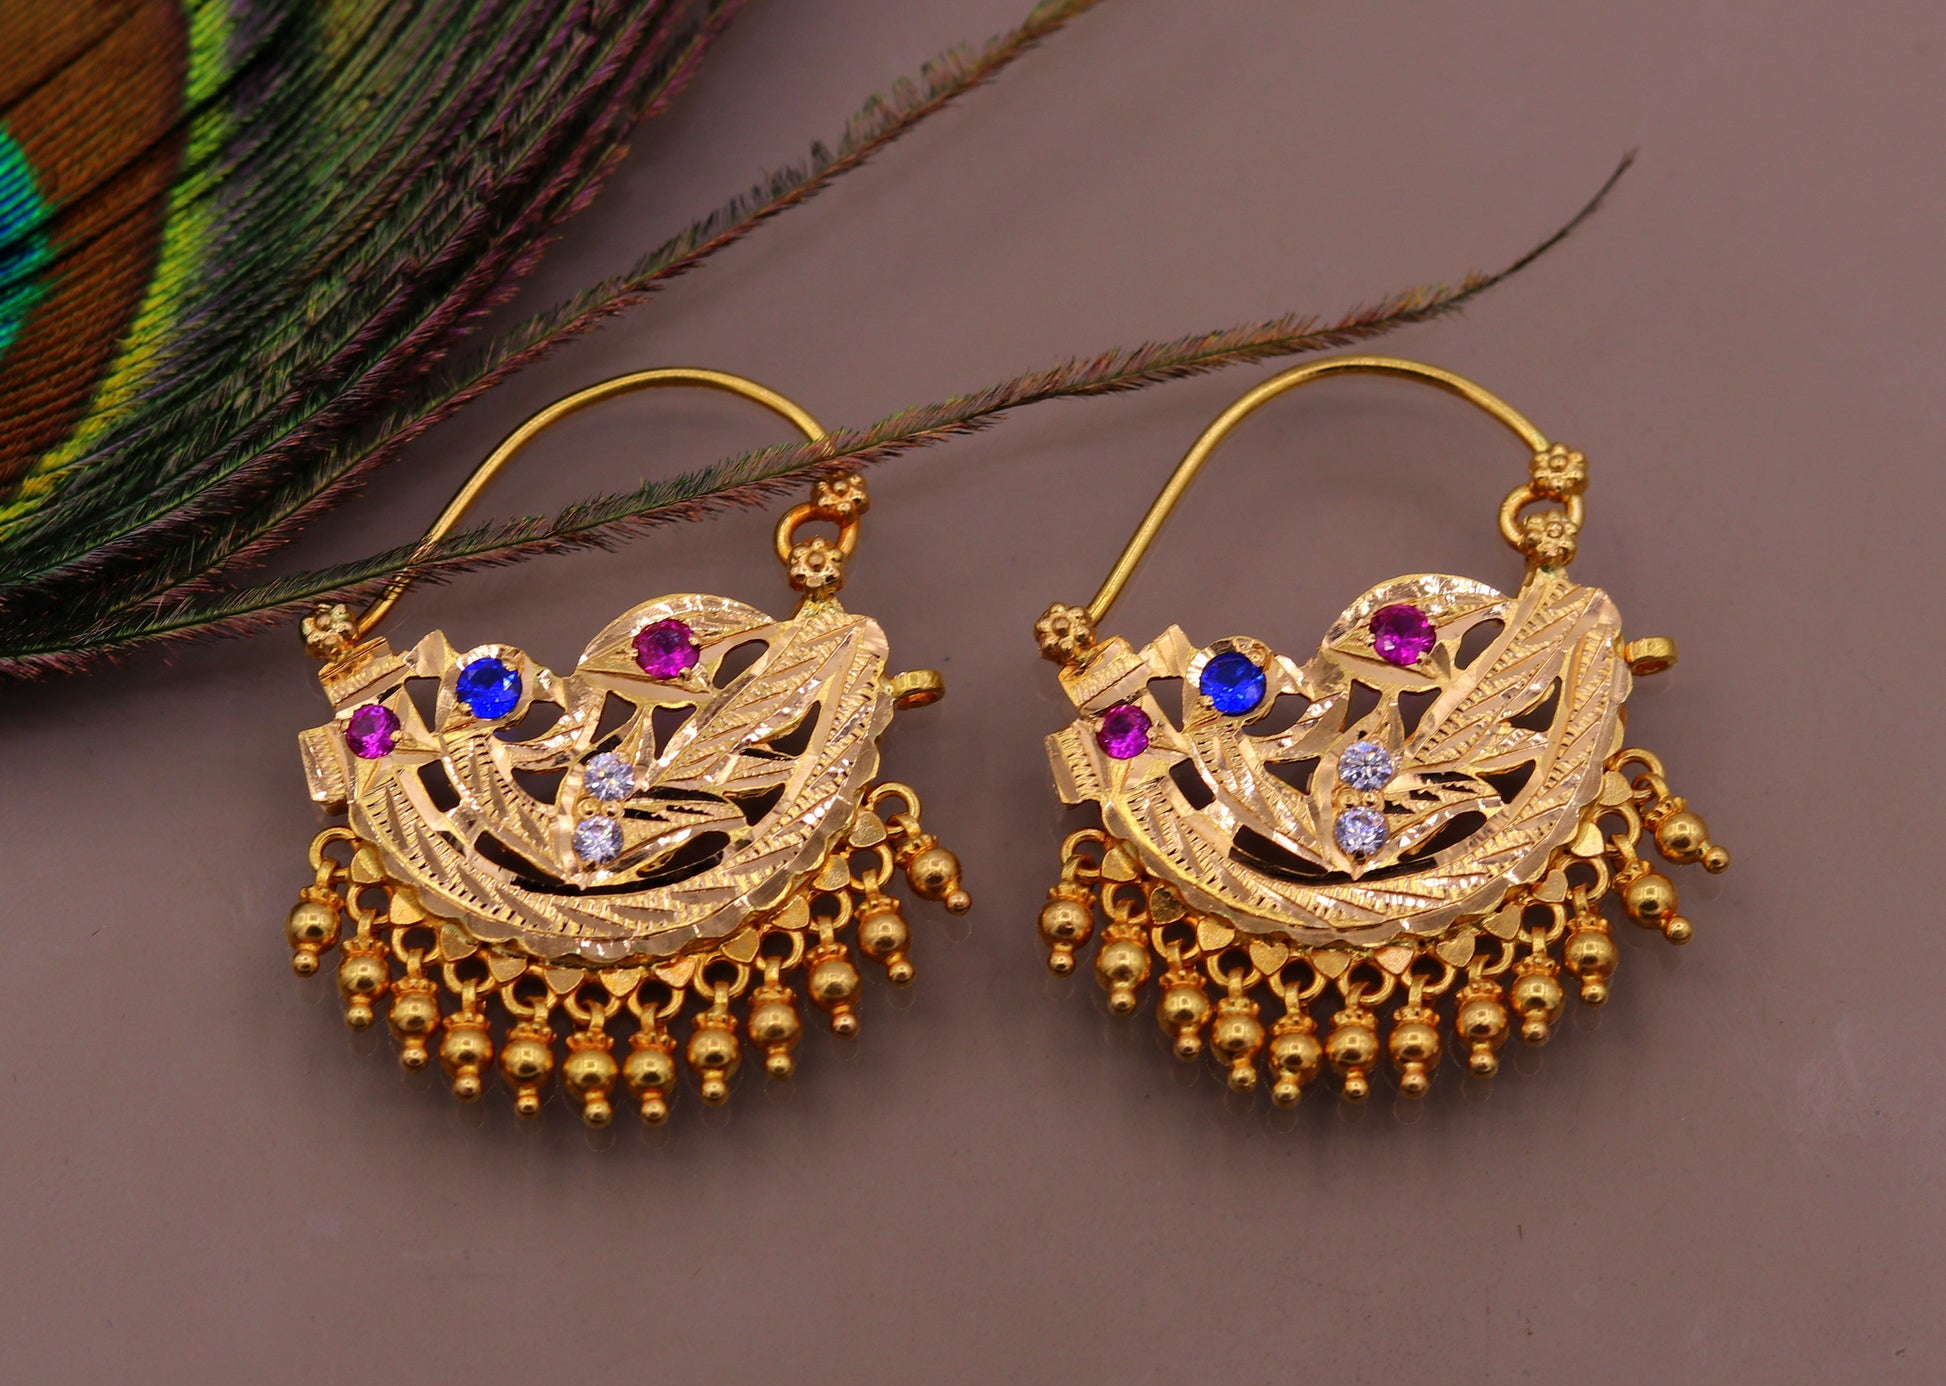 vintage antique handmade 22karat yellow gold solid tribal style hanging bells earrings hoops india jewelry - TRIBAL ORNAMENTS